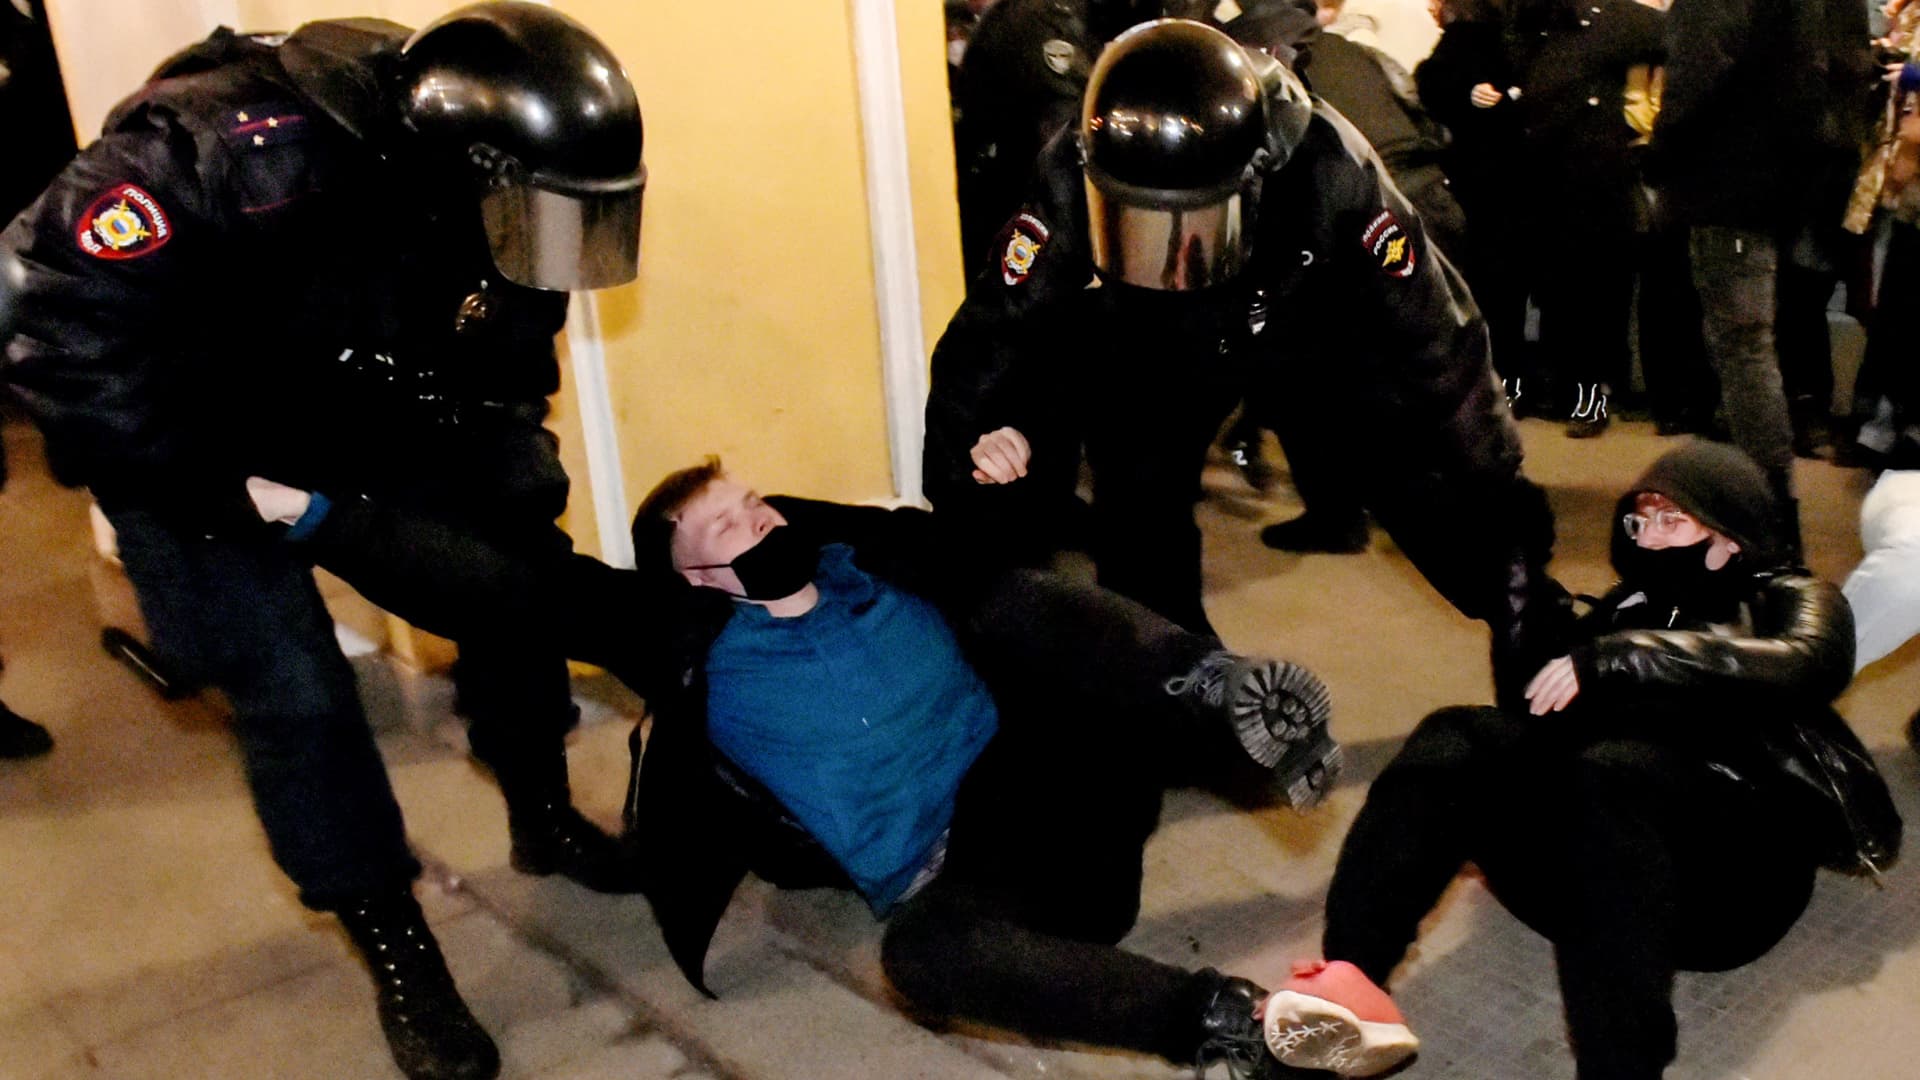 Police officers detain a demonstrators during a protest against Russia's invasion of Ukraine in central Saint Petersburg on March 1, 2022.